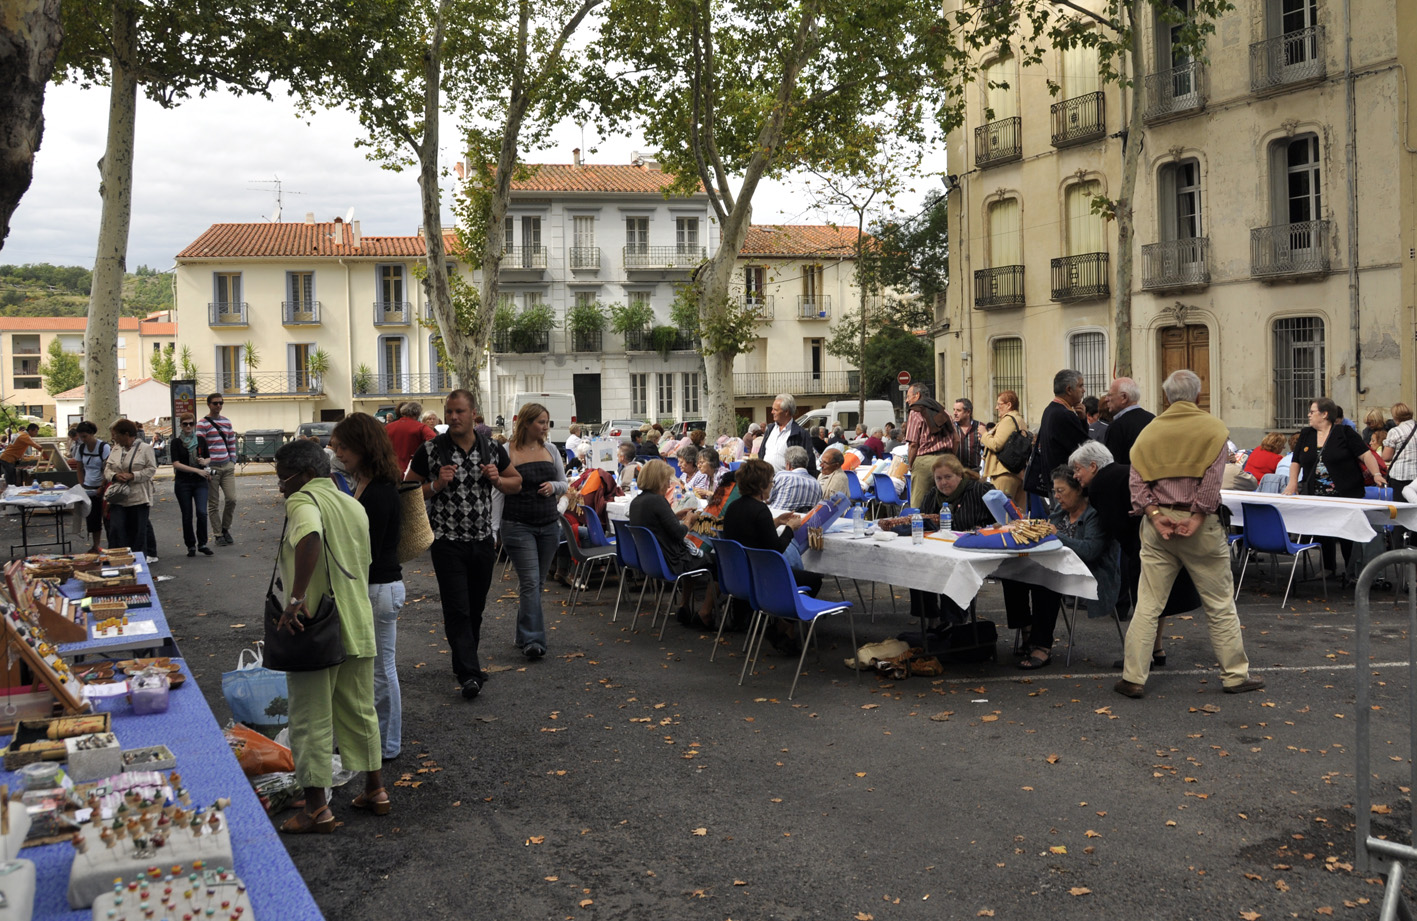 Lacemakers in a square in Céret during the Fall festival.